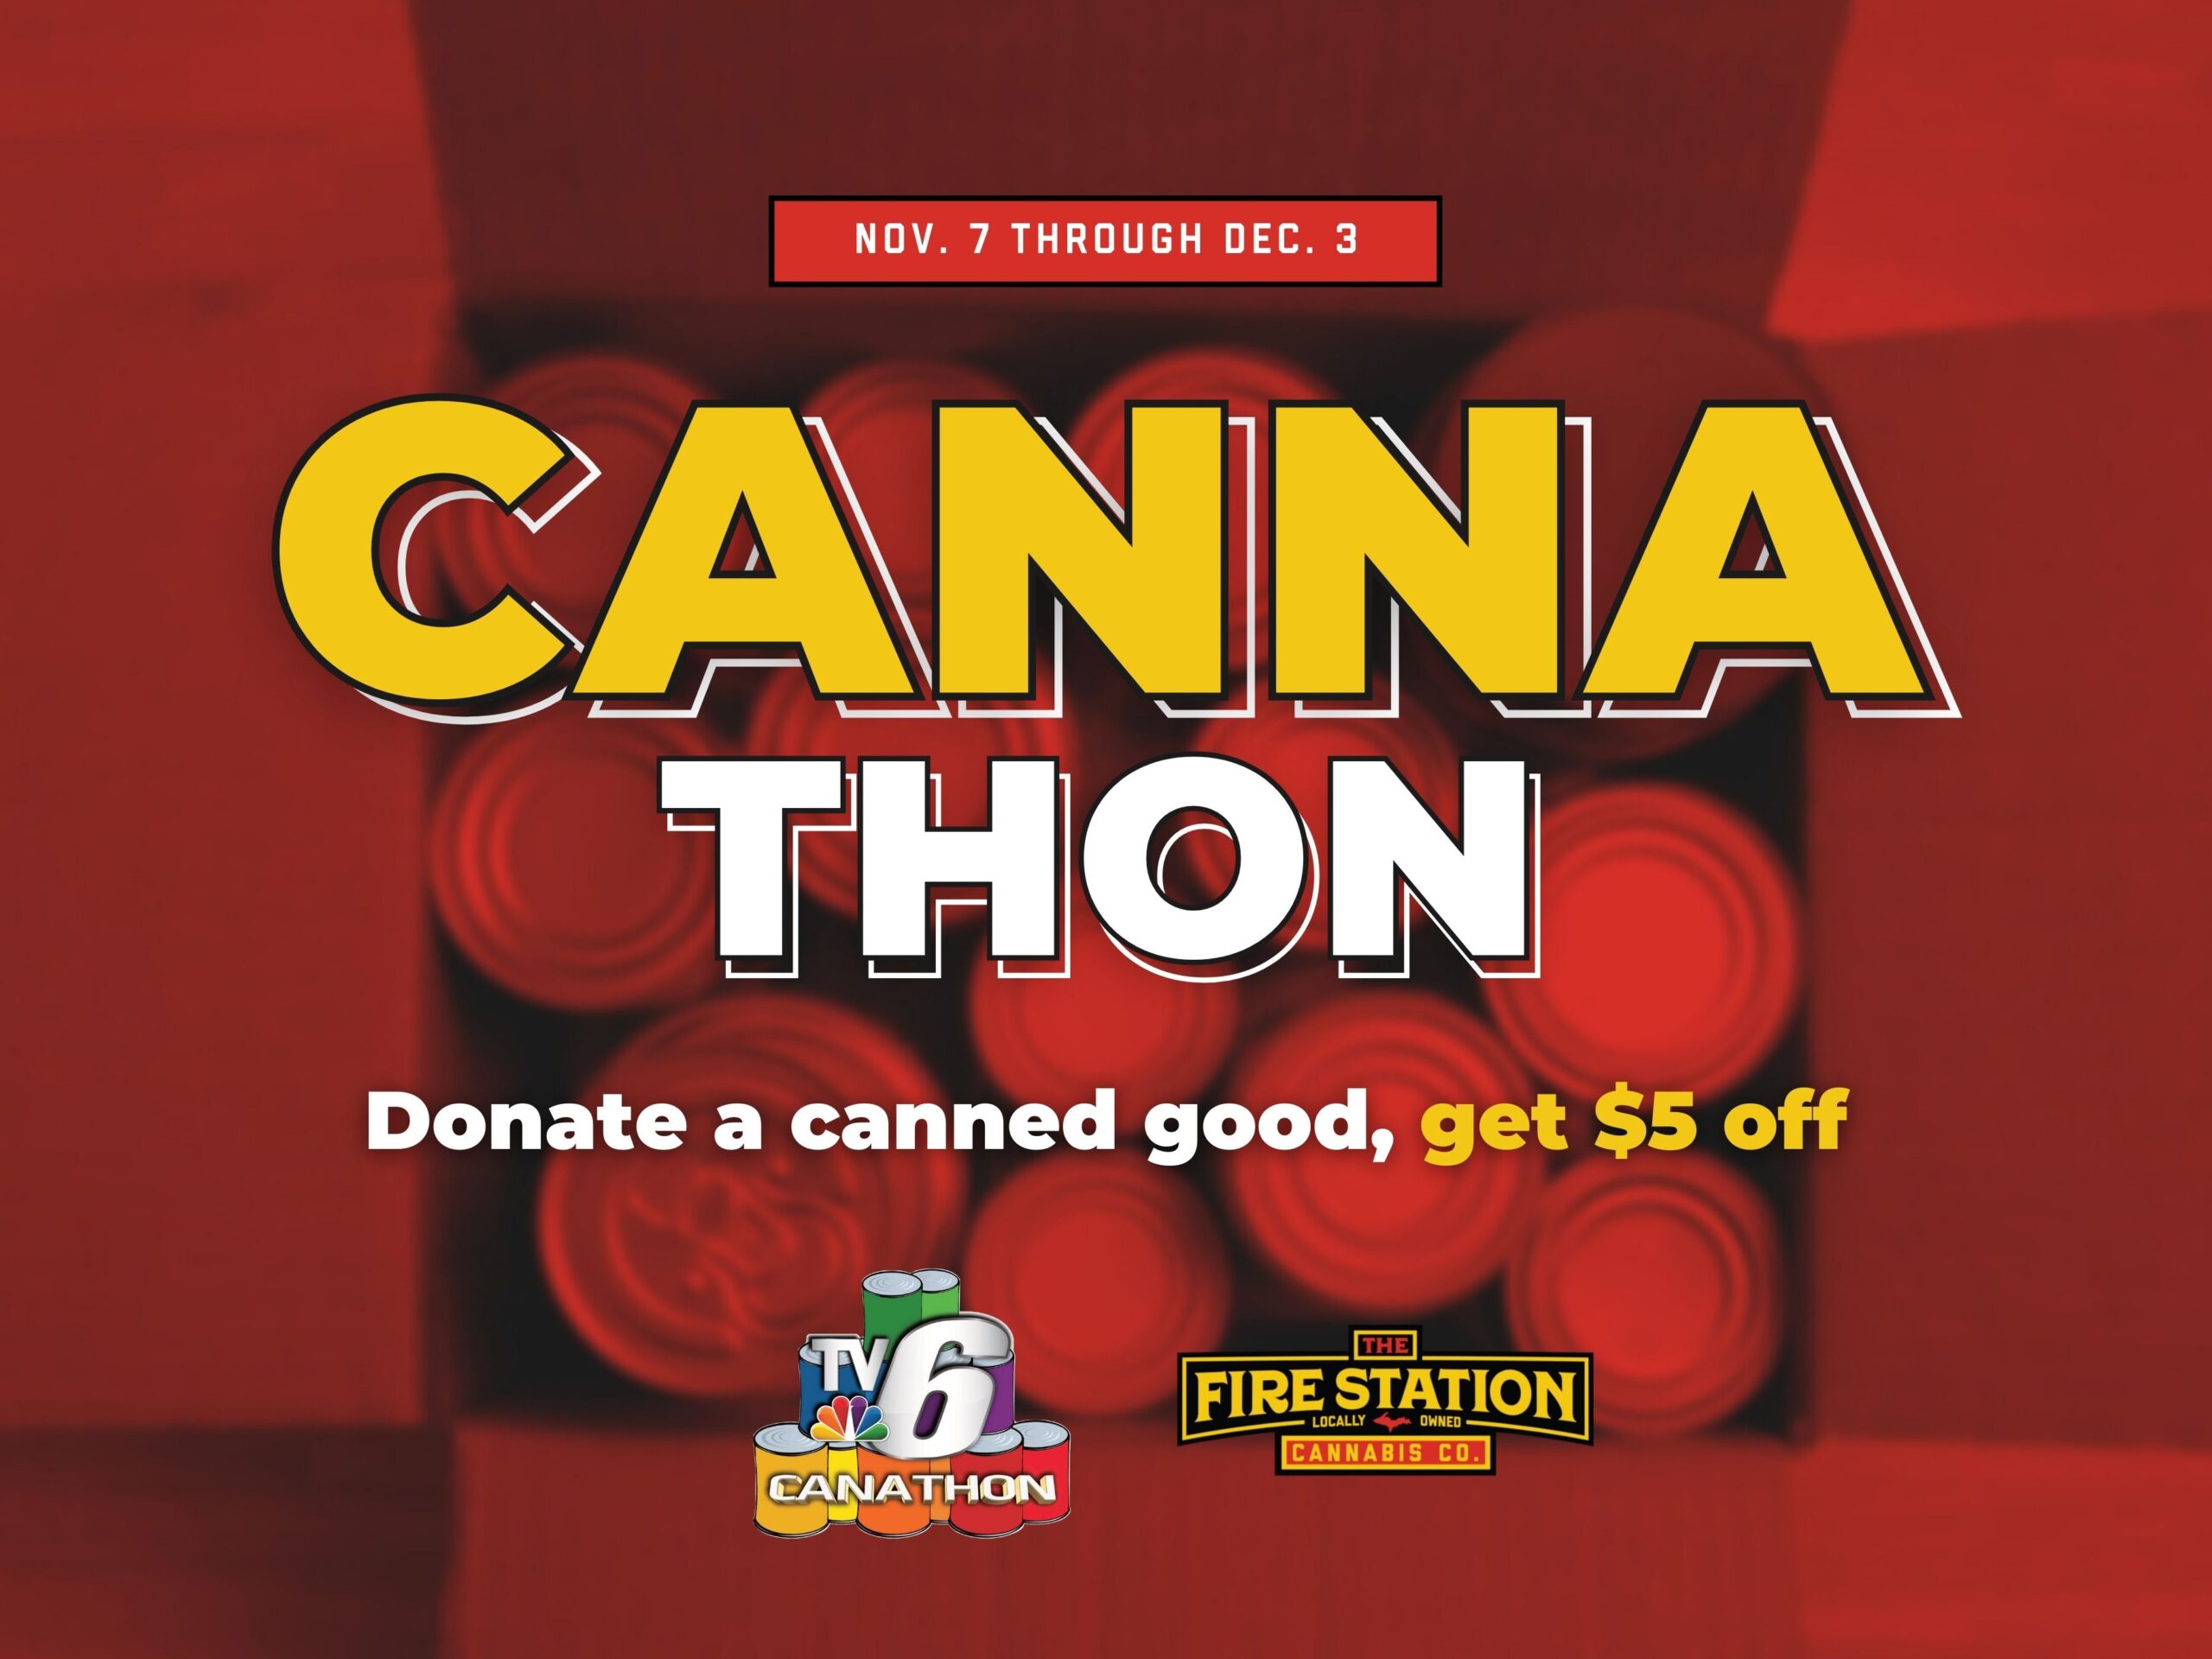 The Fire Station Encourages Participation in the TV6 Canathon